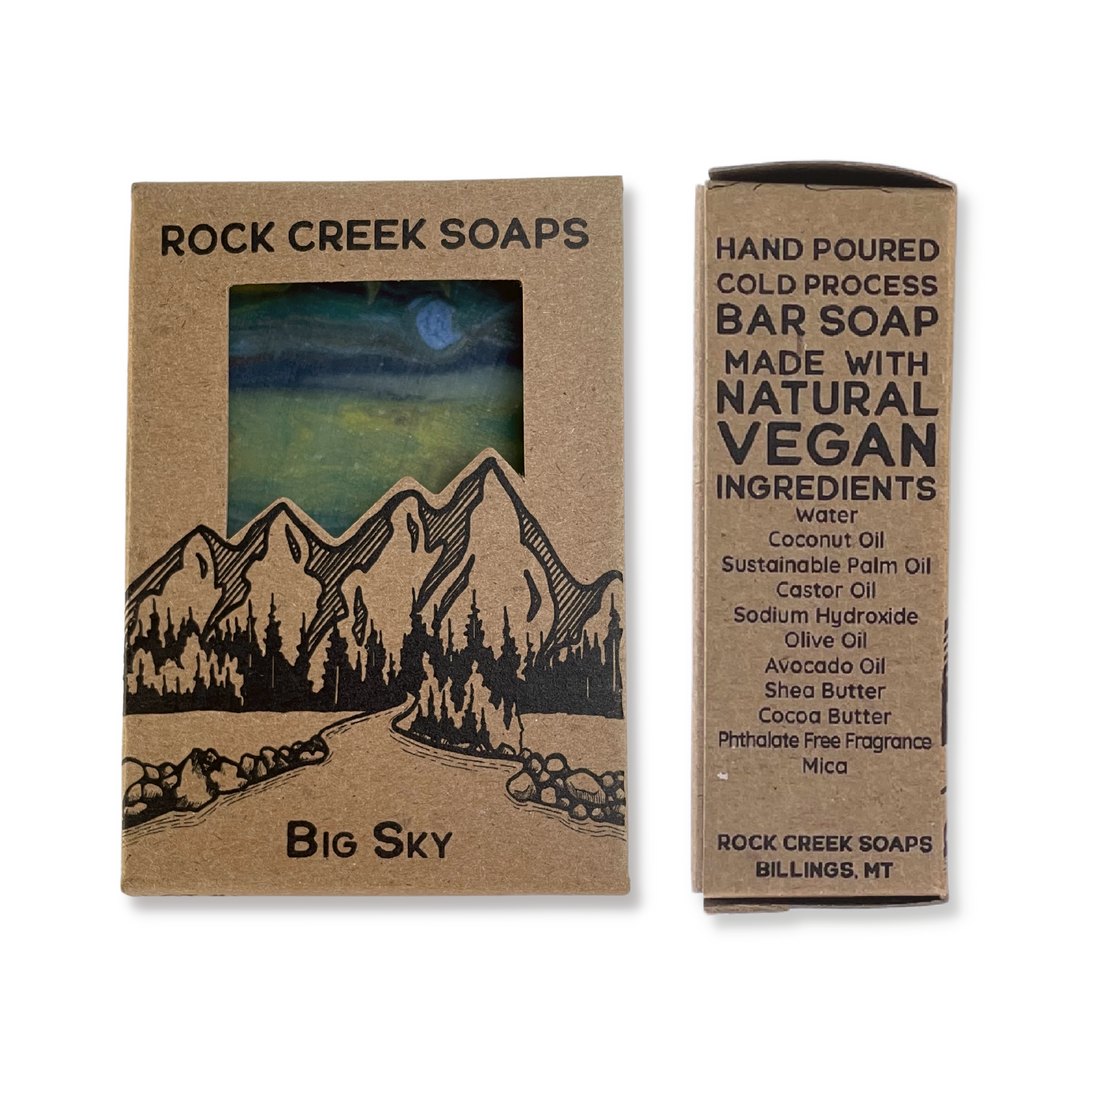 Rock Creek Soaps Big Sky Scent In Plastic Free, Kraft Cardboard Packaging. Front And Side Views, Showing Features And Ingredients.